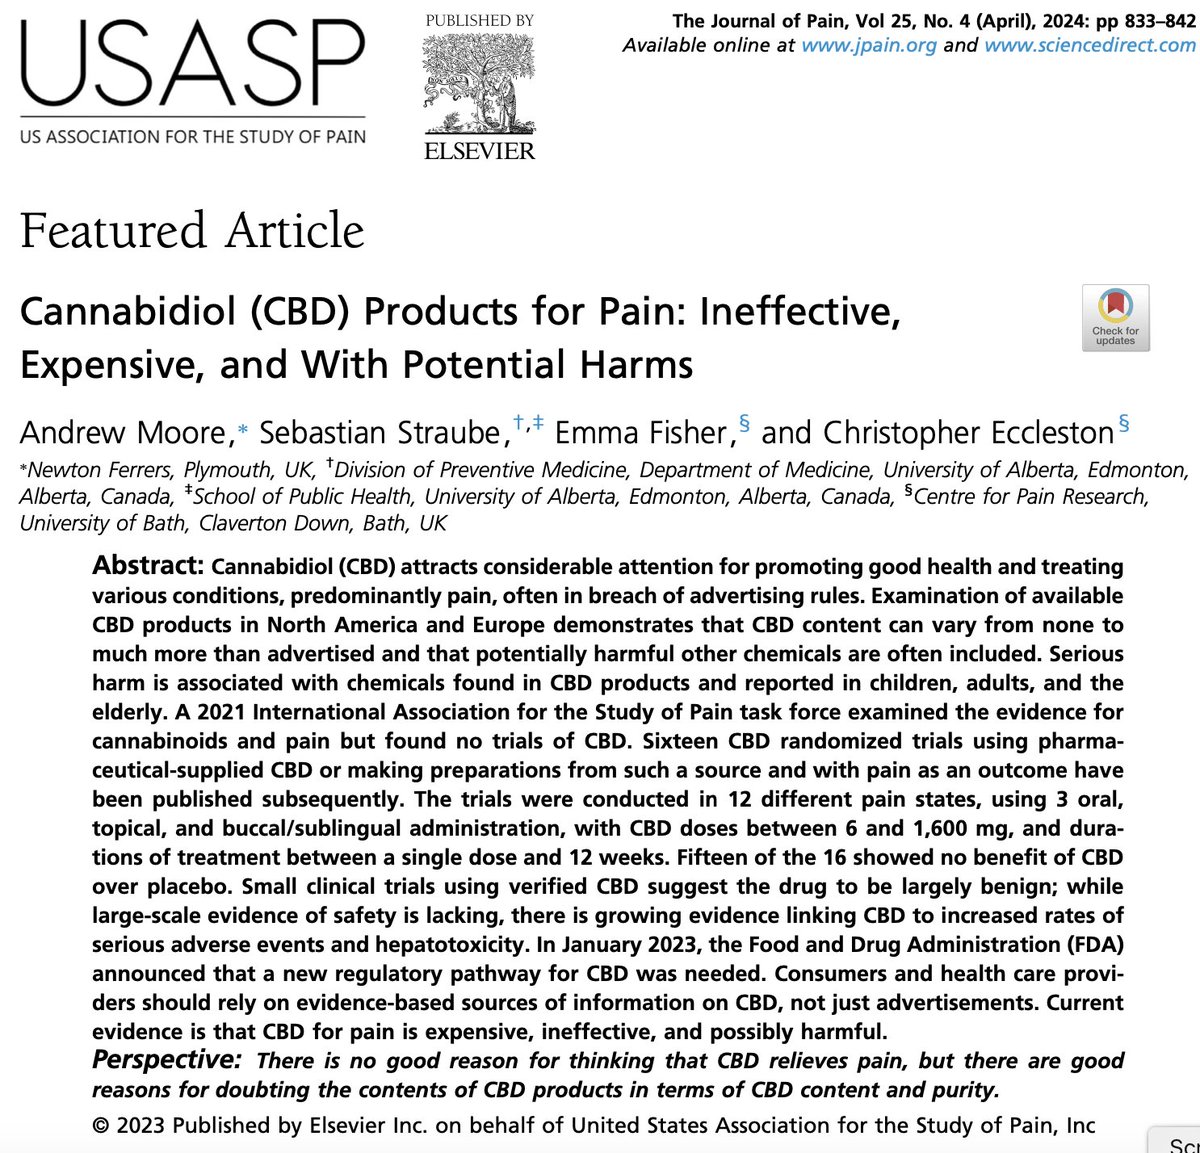 Free to air today in @TheJournal_Pain @EmmaFisher1 @Chris_Eccleston and Sebastian Straube. We found 15 of 16 RCTs of CBD for pain found no effect at all. Another good RCT in @TheLancet since reported no effects. Consumers are being conned by expensive, harmful, quack remedies.